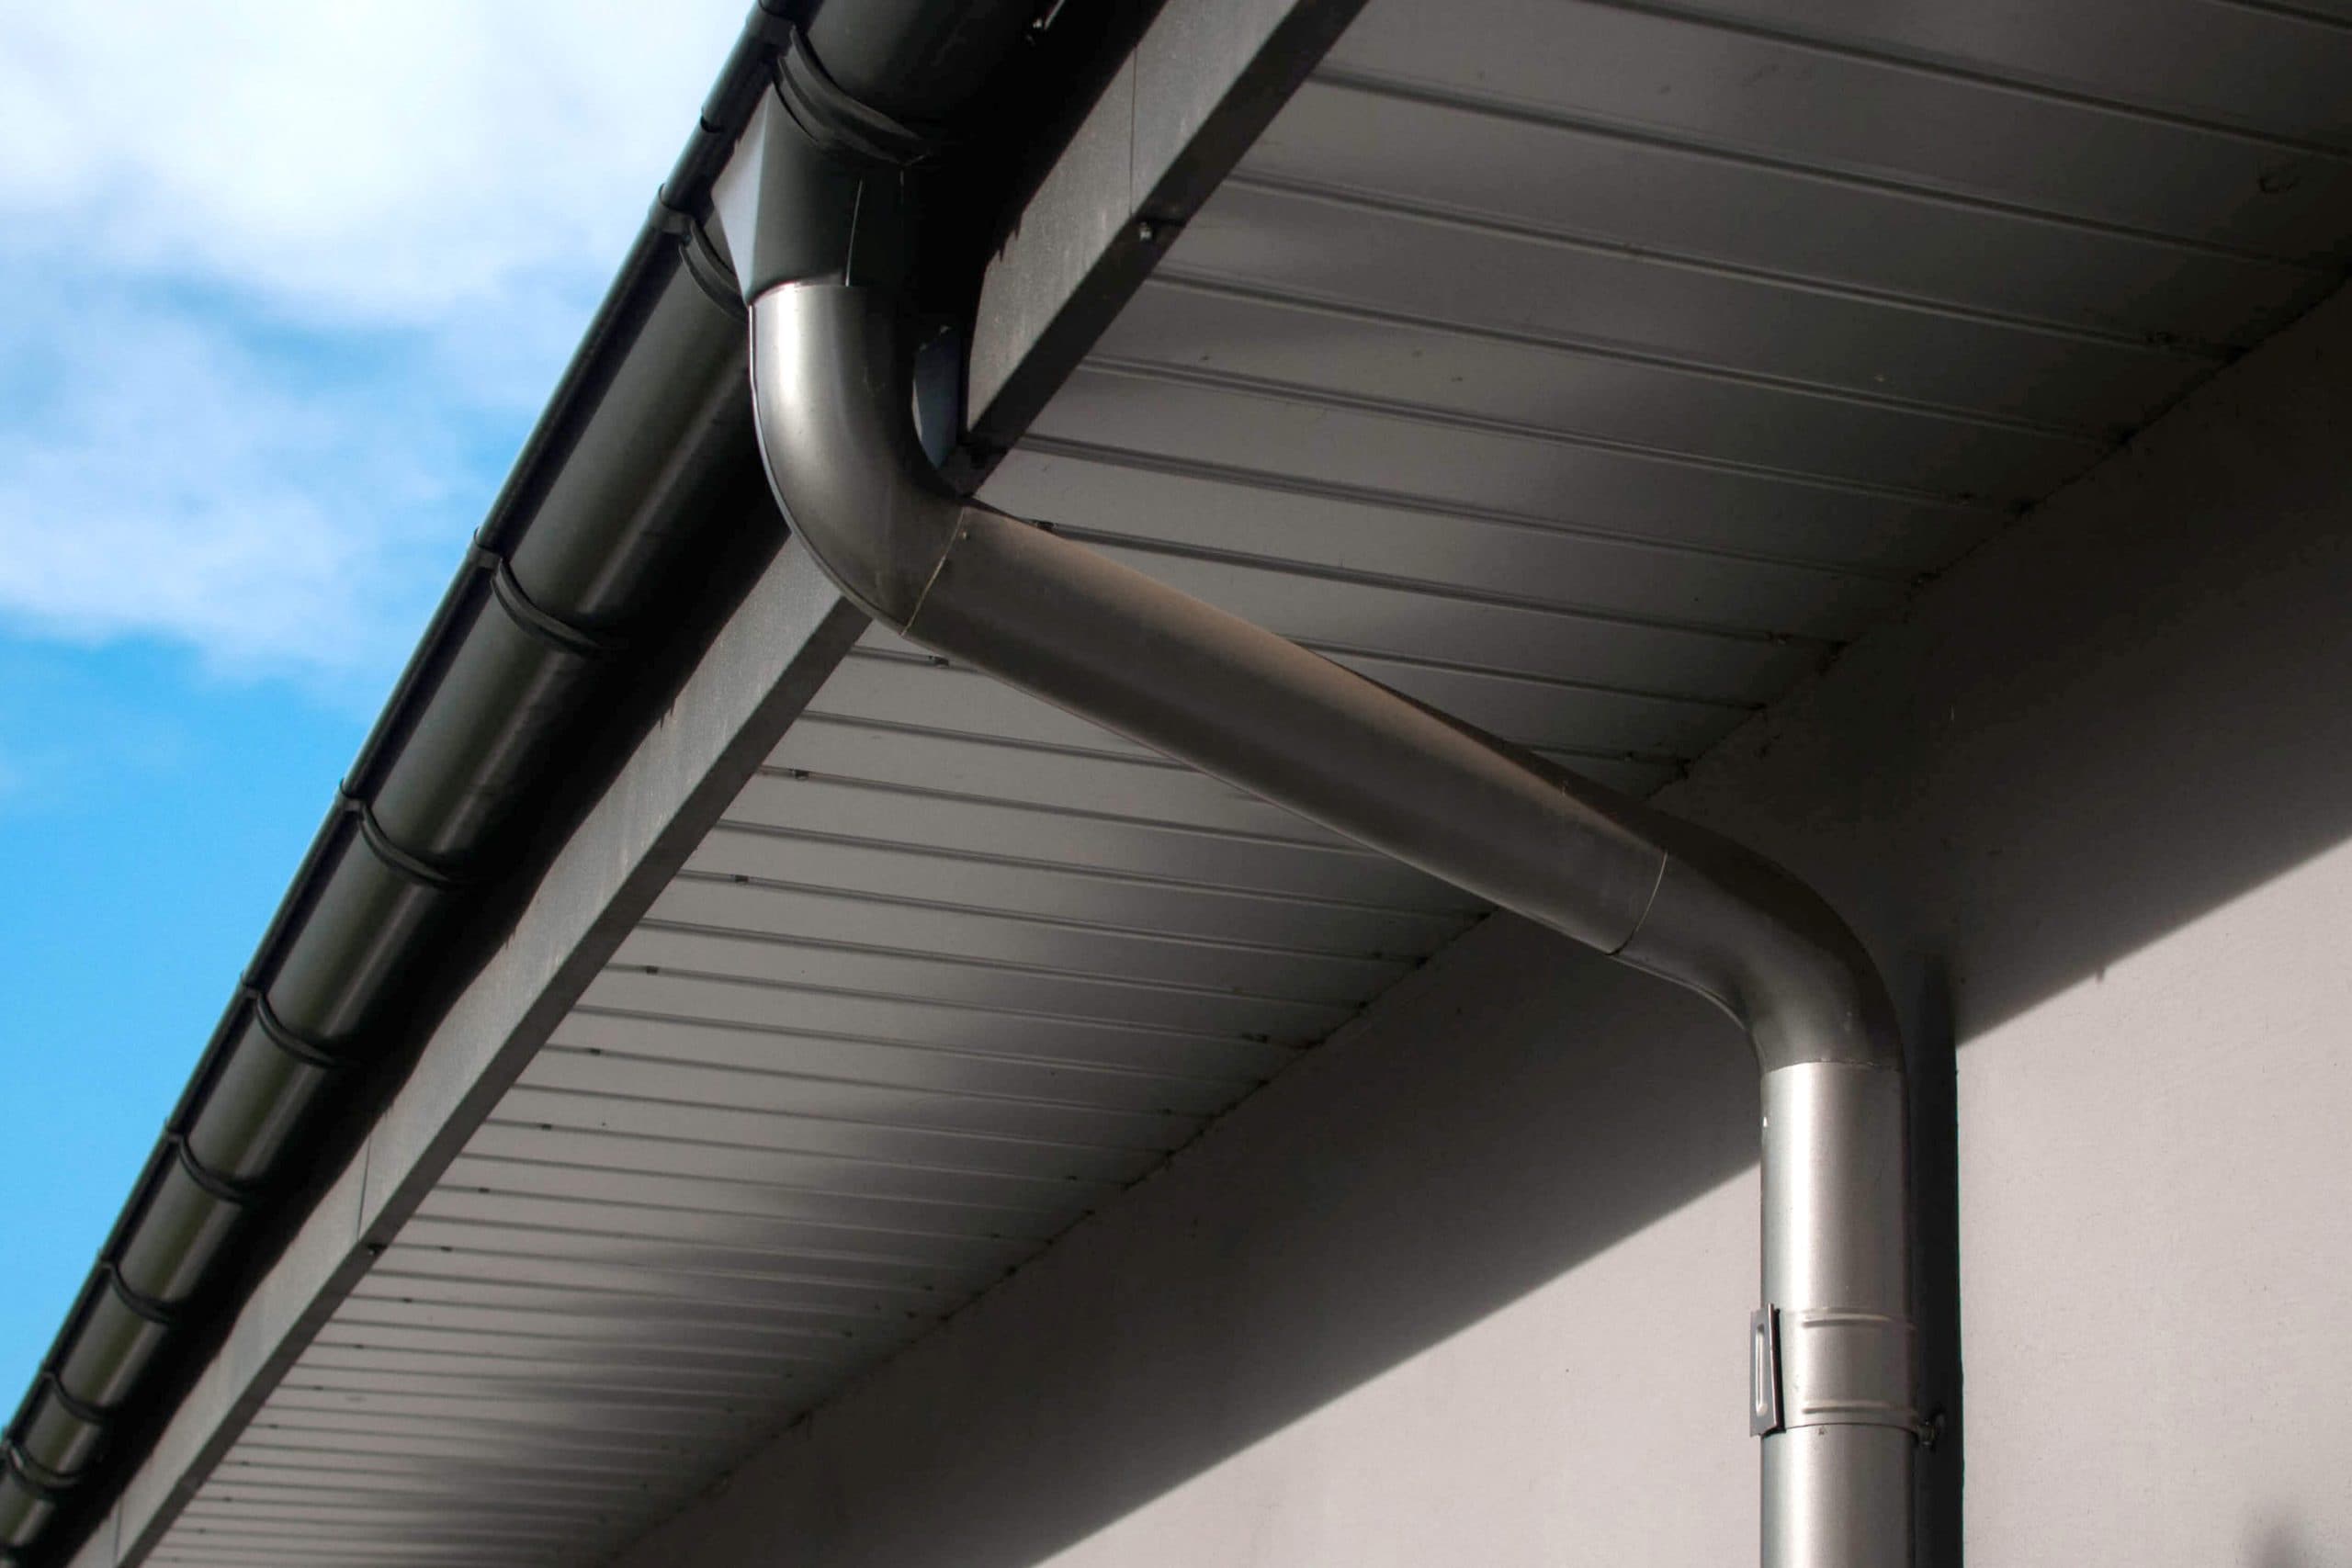 Corrosion-resistant galvanized gutters installed on a commercial building in Lincoln